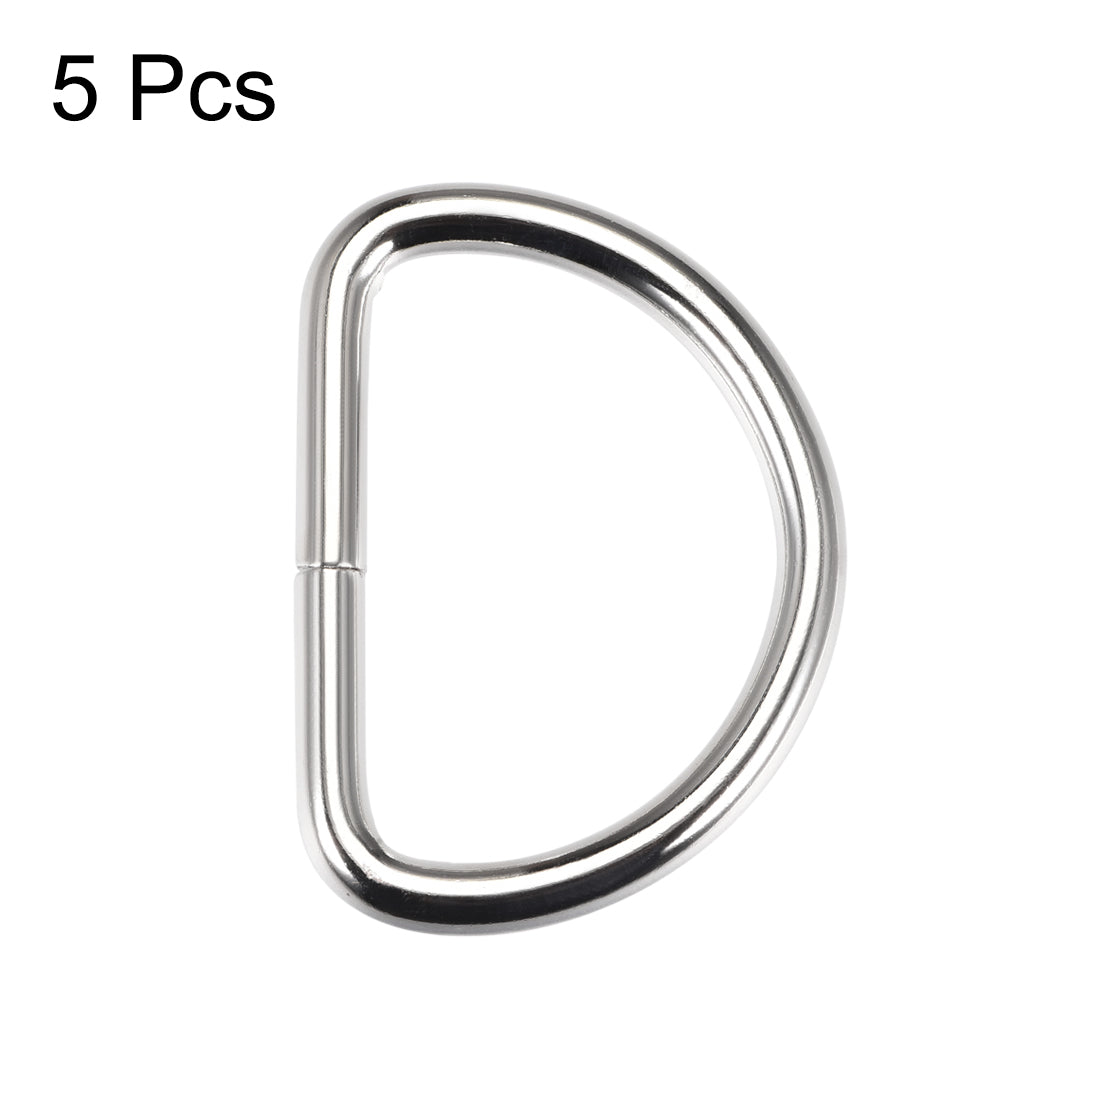 uxcell Uxcell 5 Pcs D Ring Buckle 1.6 Inch Metal Semi-Circular D-Rings Silver Tone for Hardware Bags Belts Craft DIY Accessories